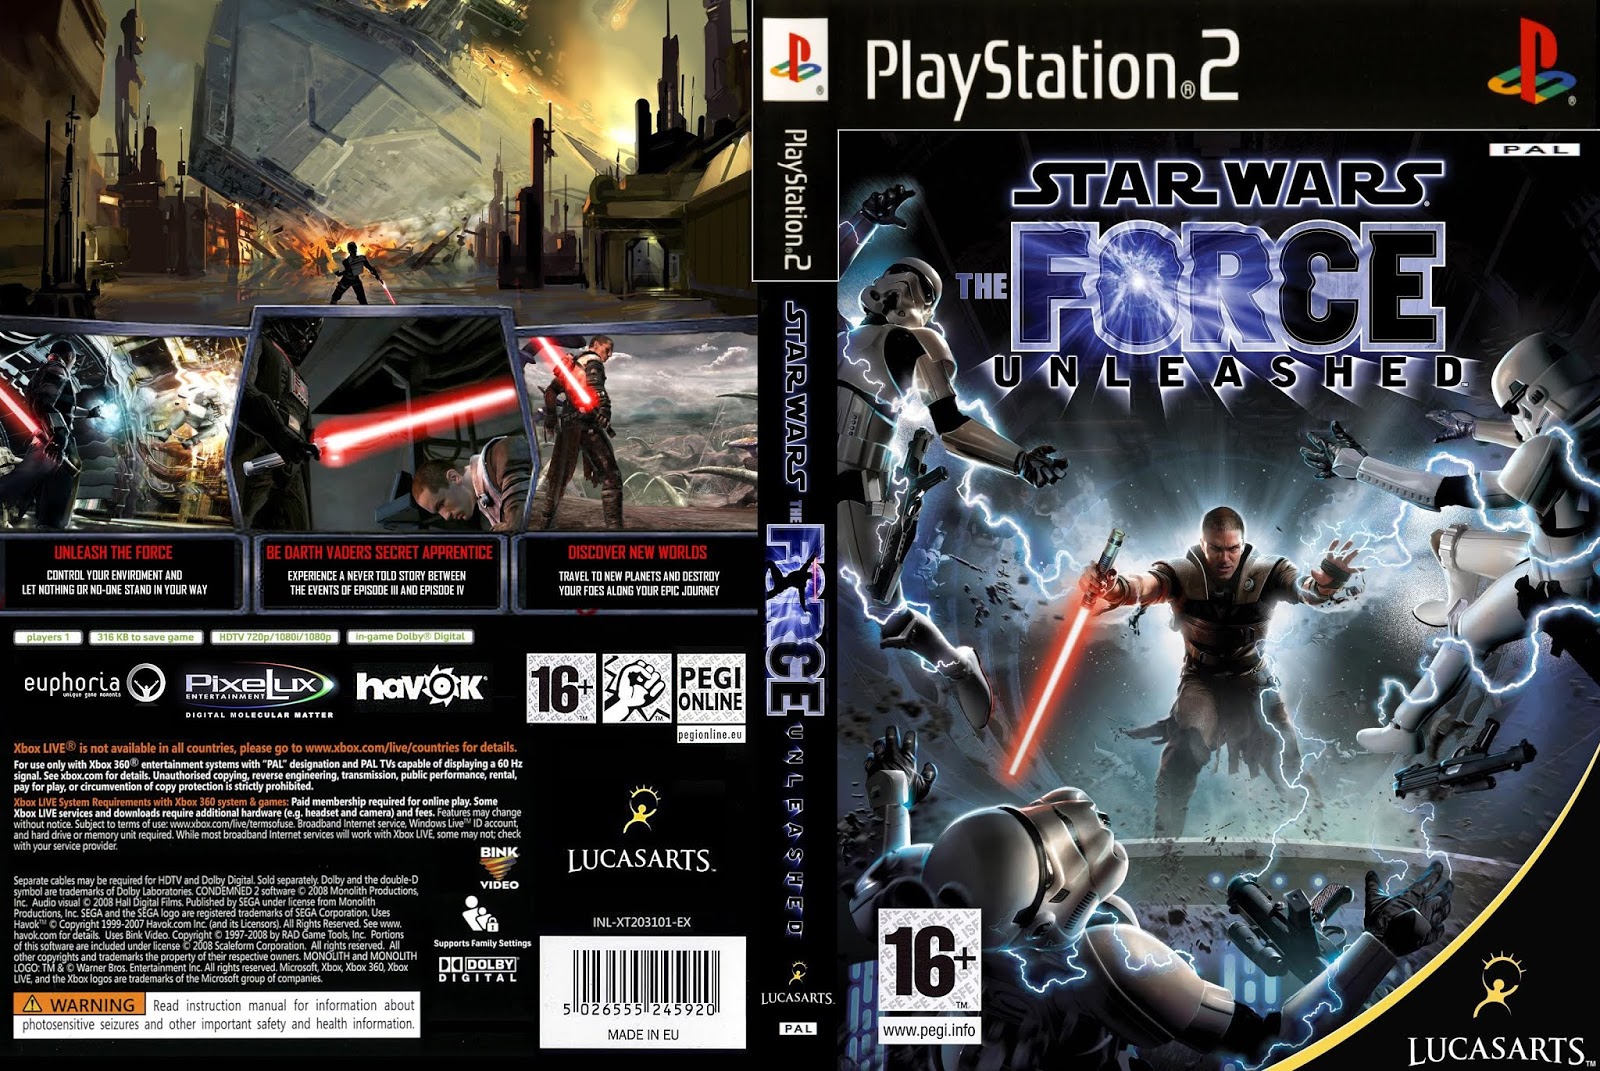 Ps3 old. Star Wars the Force unleashed ps2. Star Wars: the Force unleashed пс2. Star Wars the forse unlashed ps2. Диск ps3 Star Wars the Force unleashed.